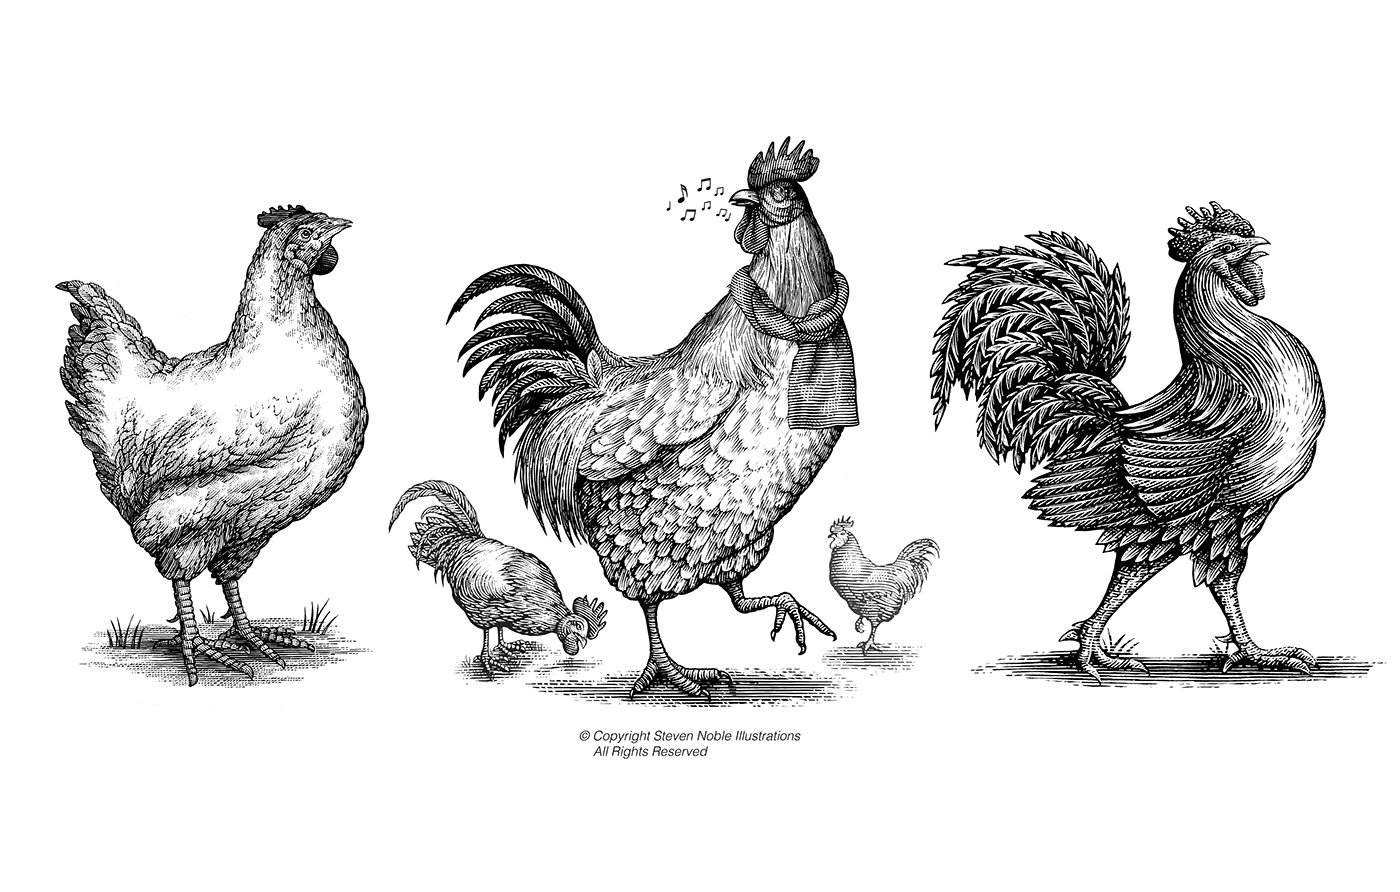 Steven Noble woodcut line art pen and ink Rooster chicken animals scratchboard engraving etching